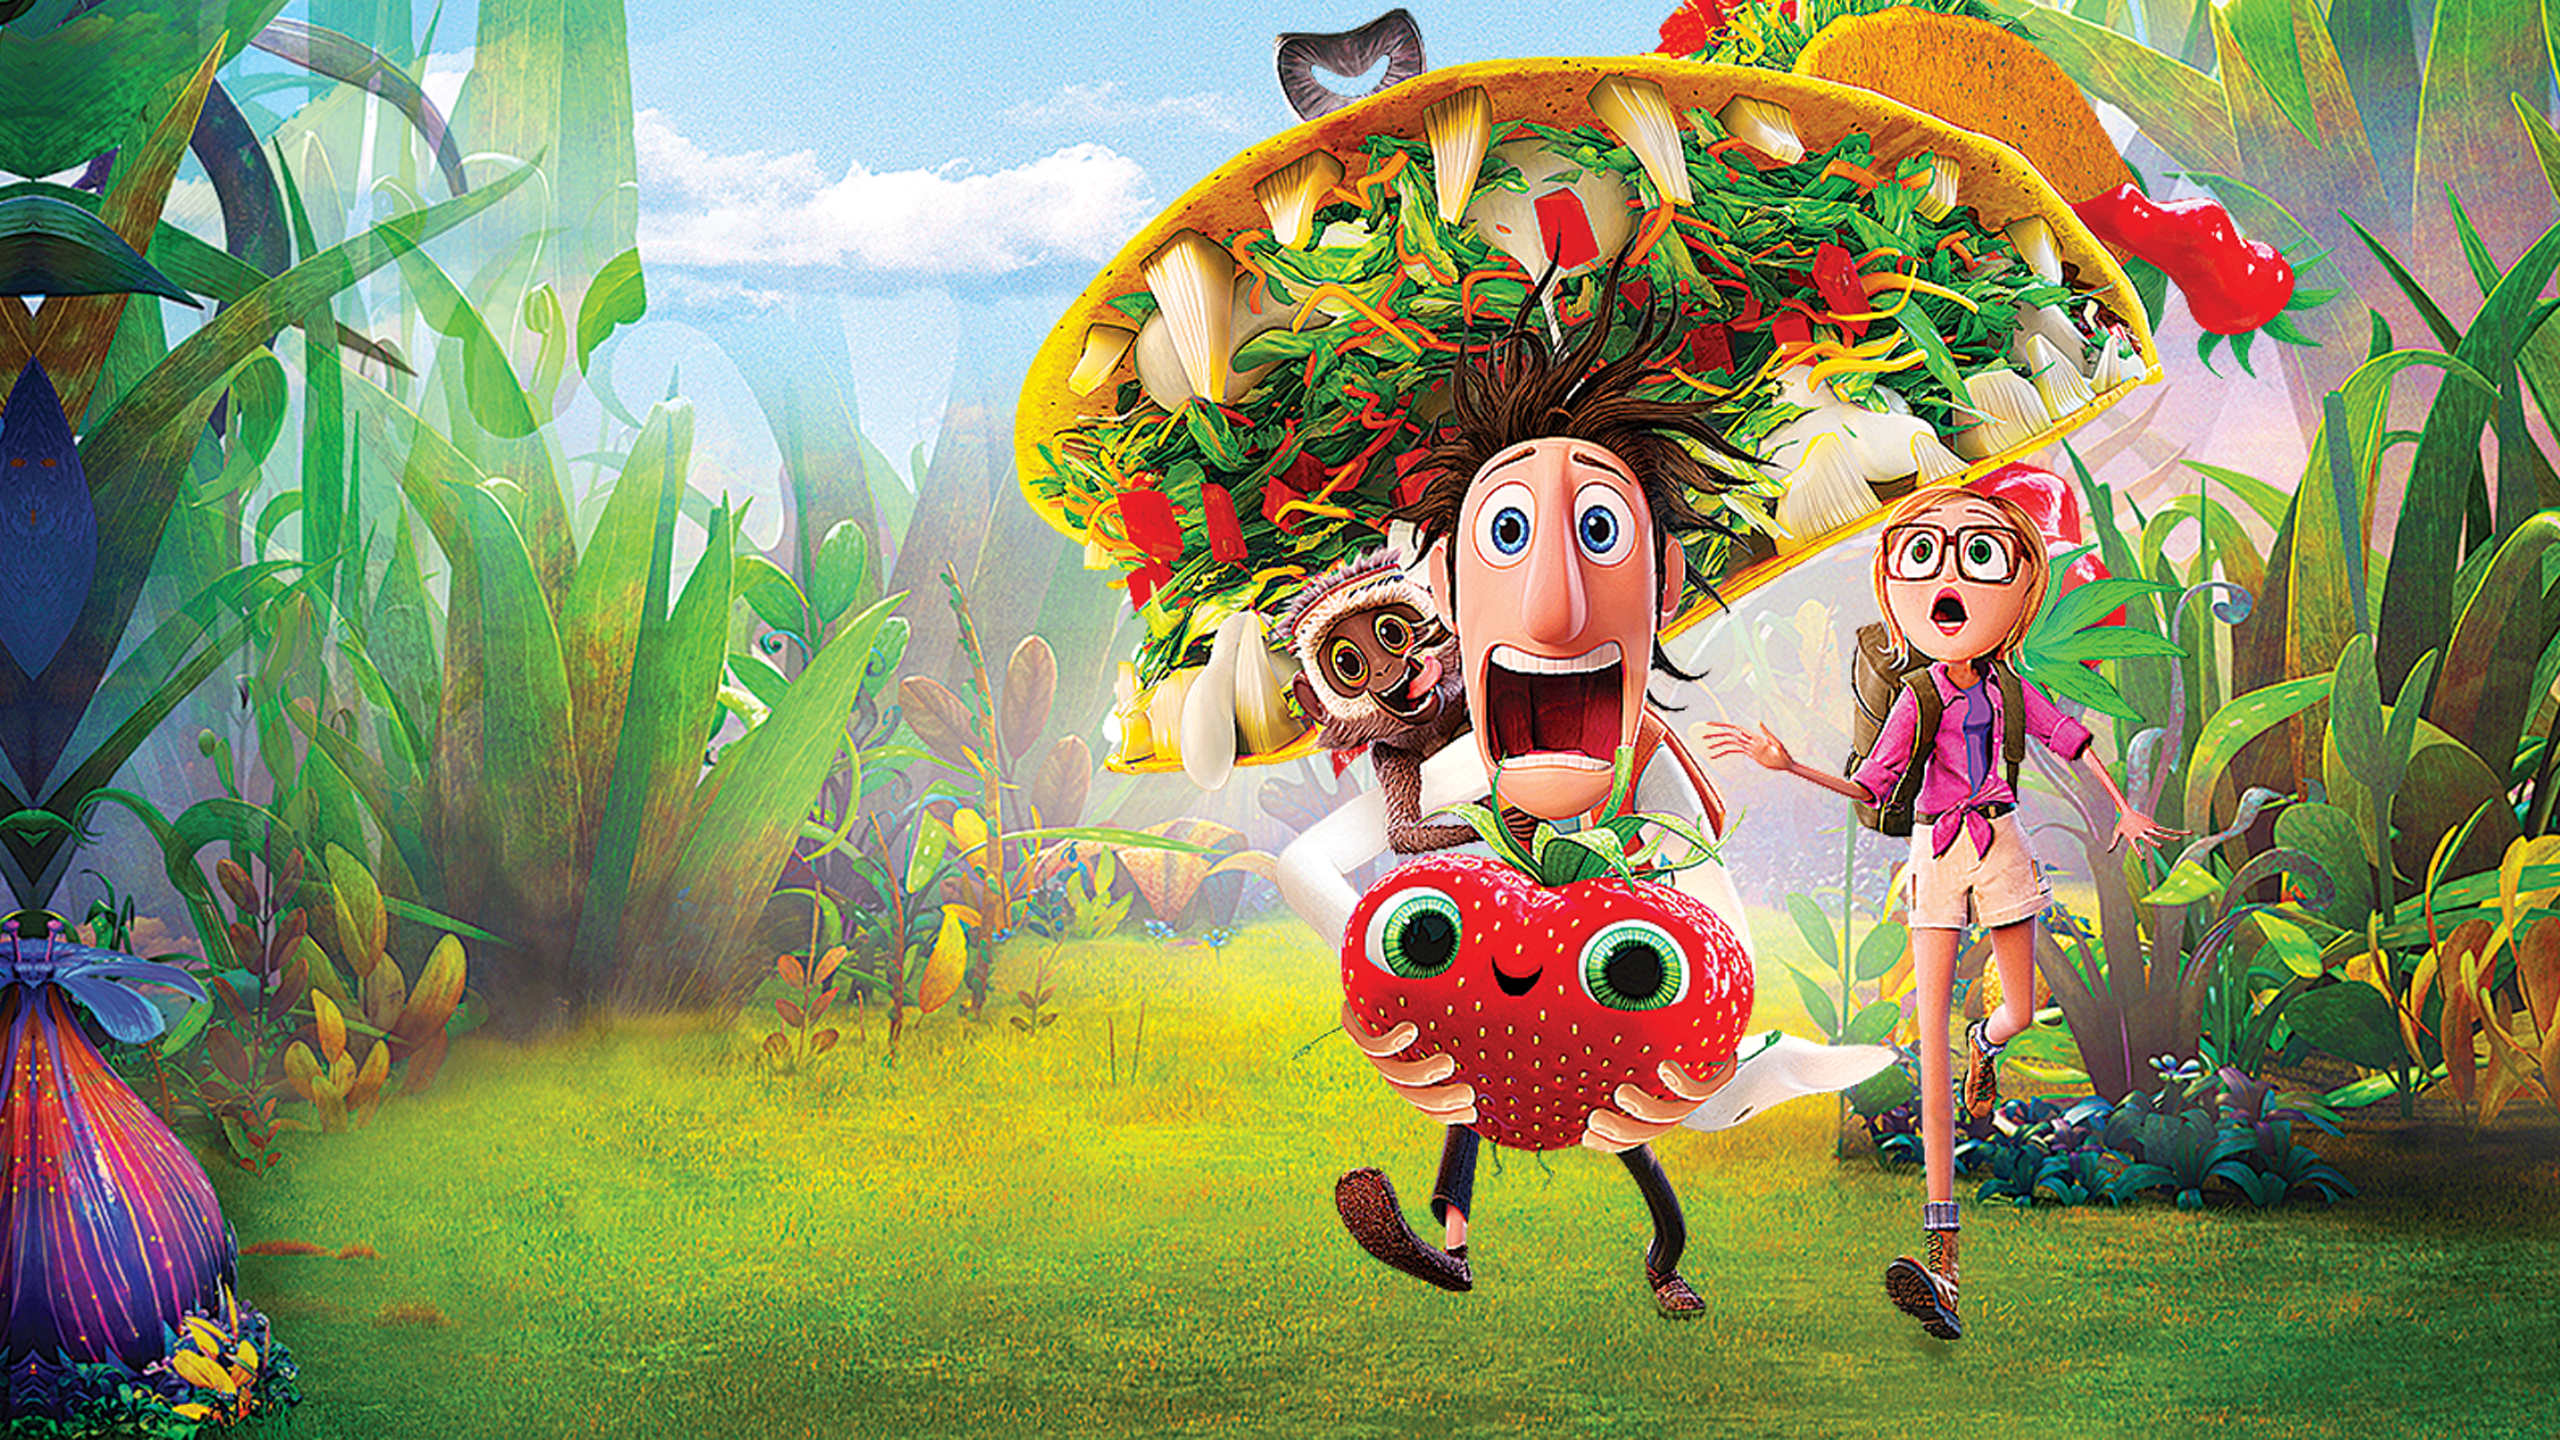 Cloudy with a Chance of Meatballs 2 / Cloudy with a Chance of Meatballs 2 (2013)